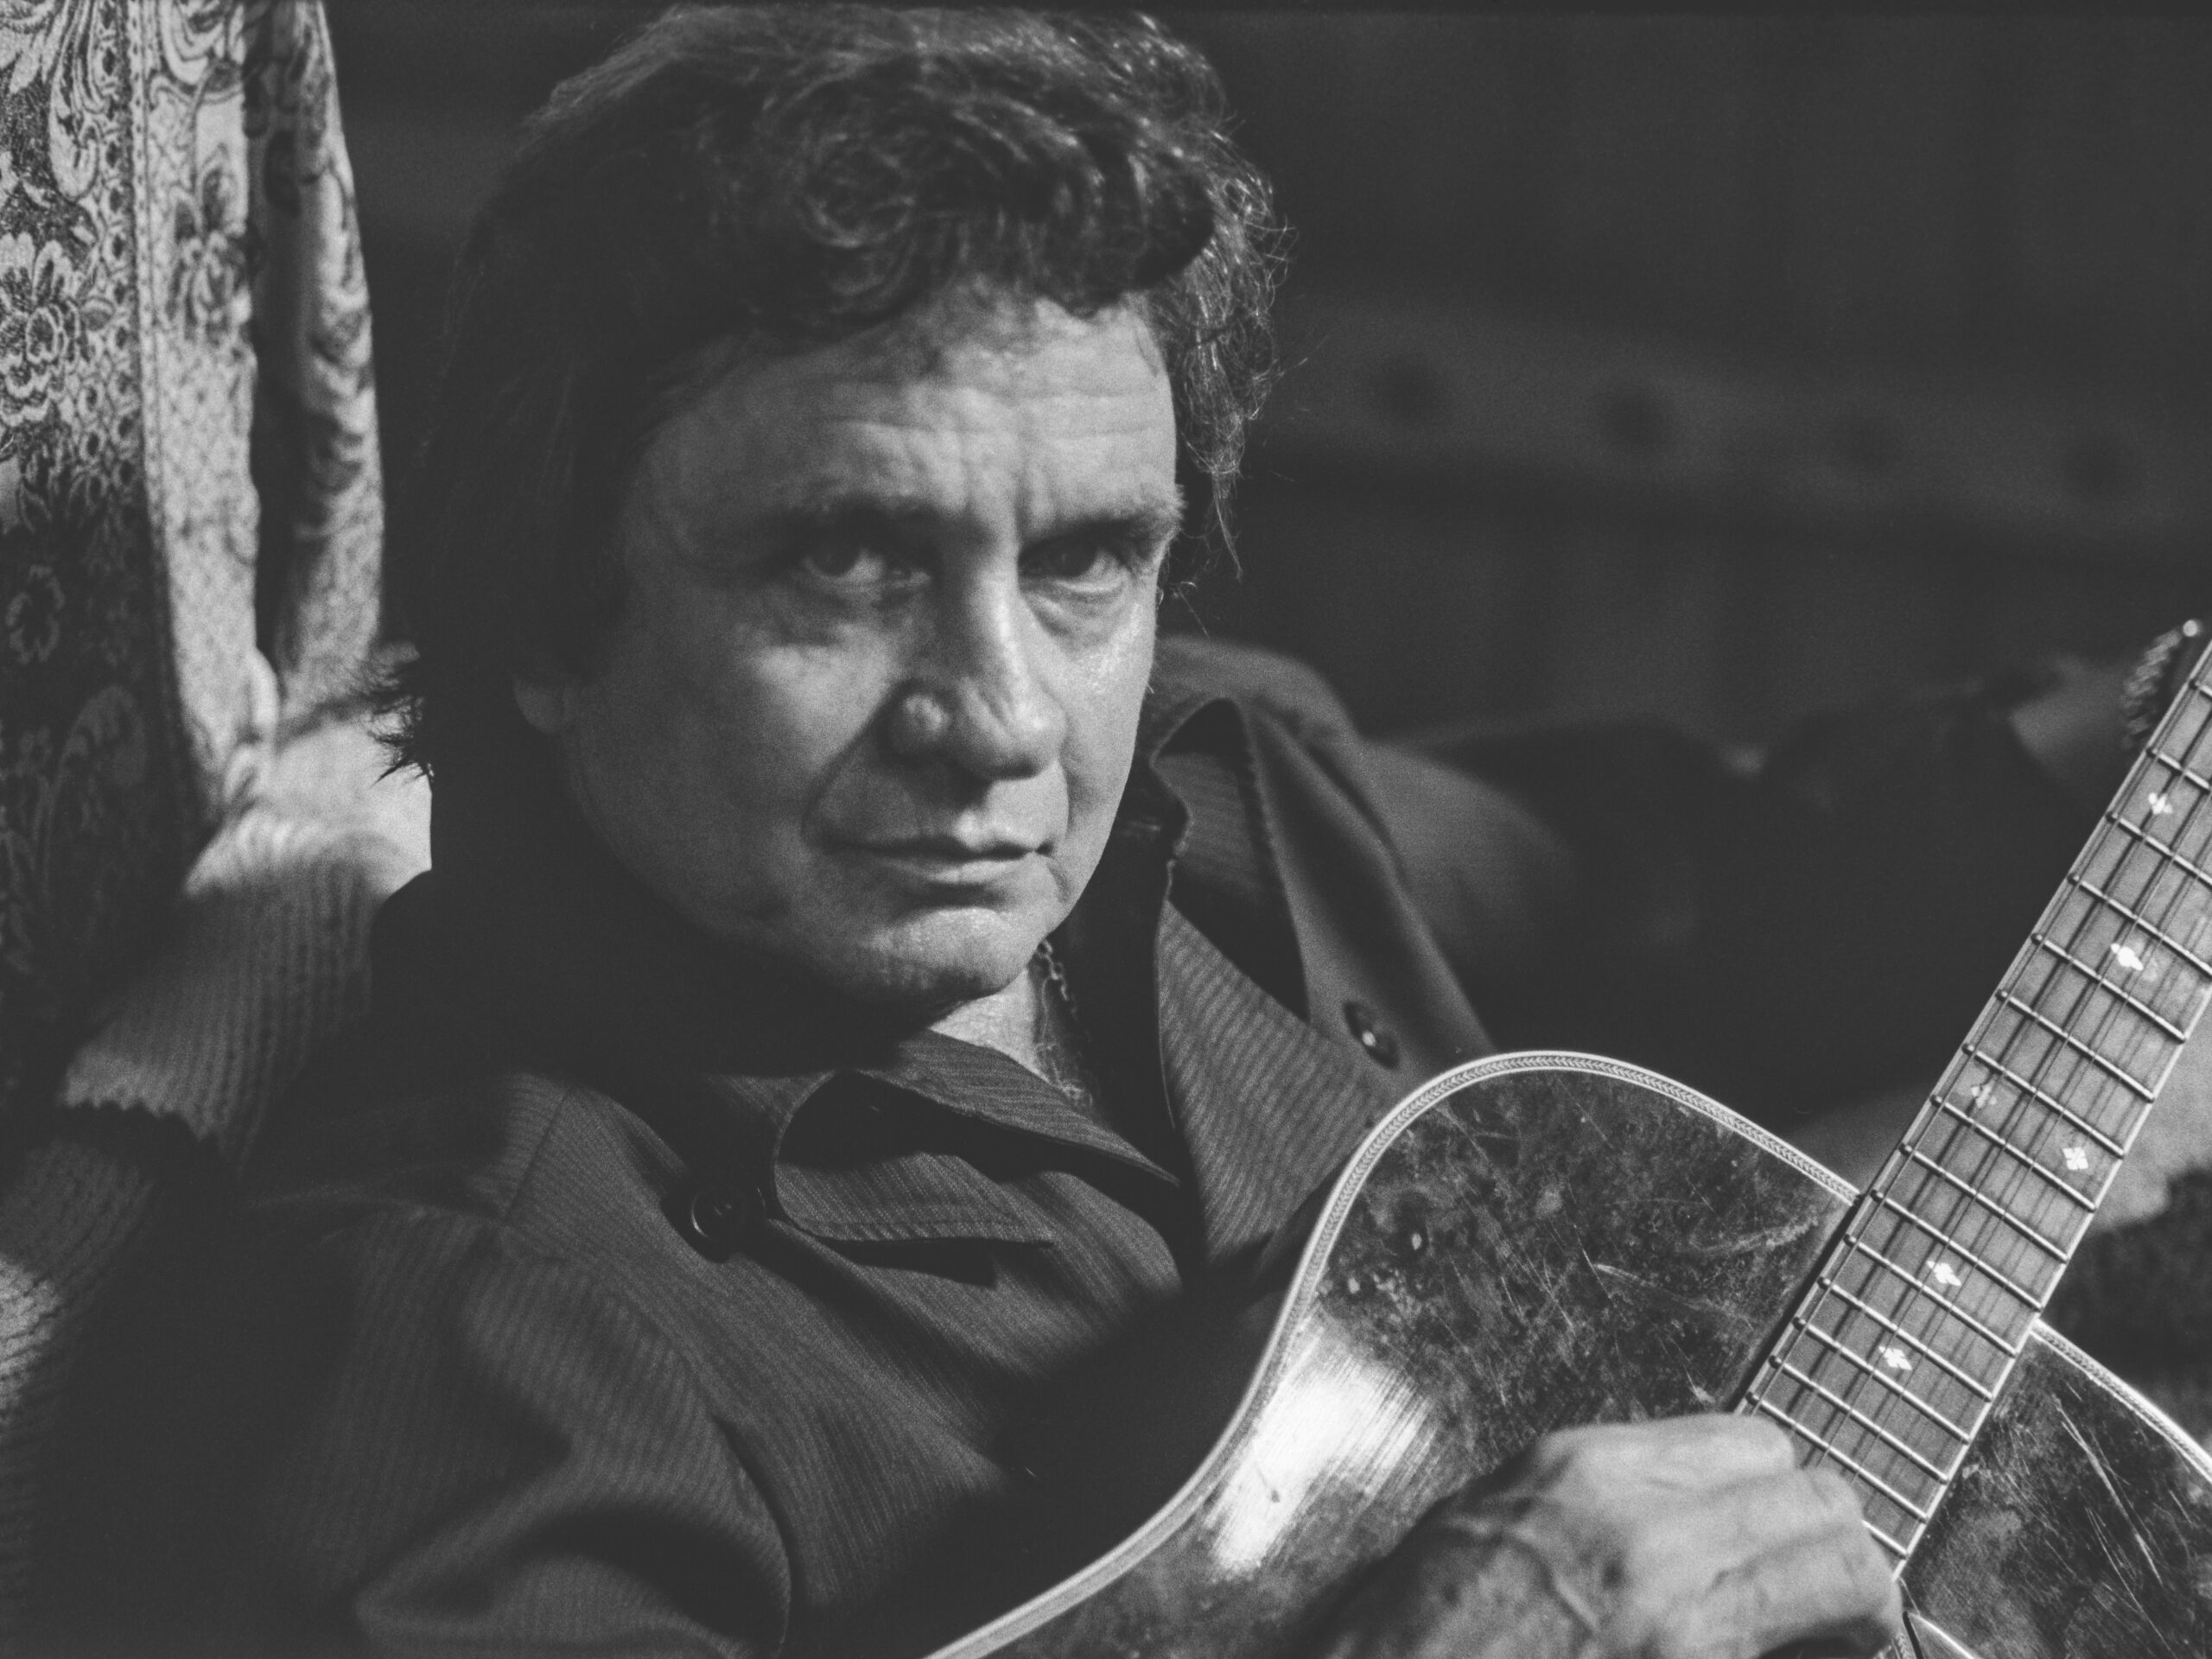 8 Tracks: Beyond the grave, Johnny Cash still shows us how to make music